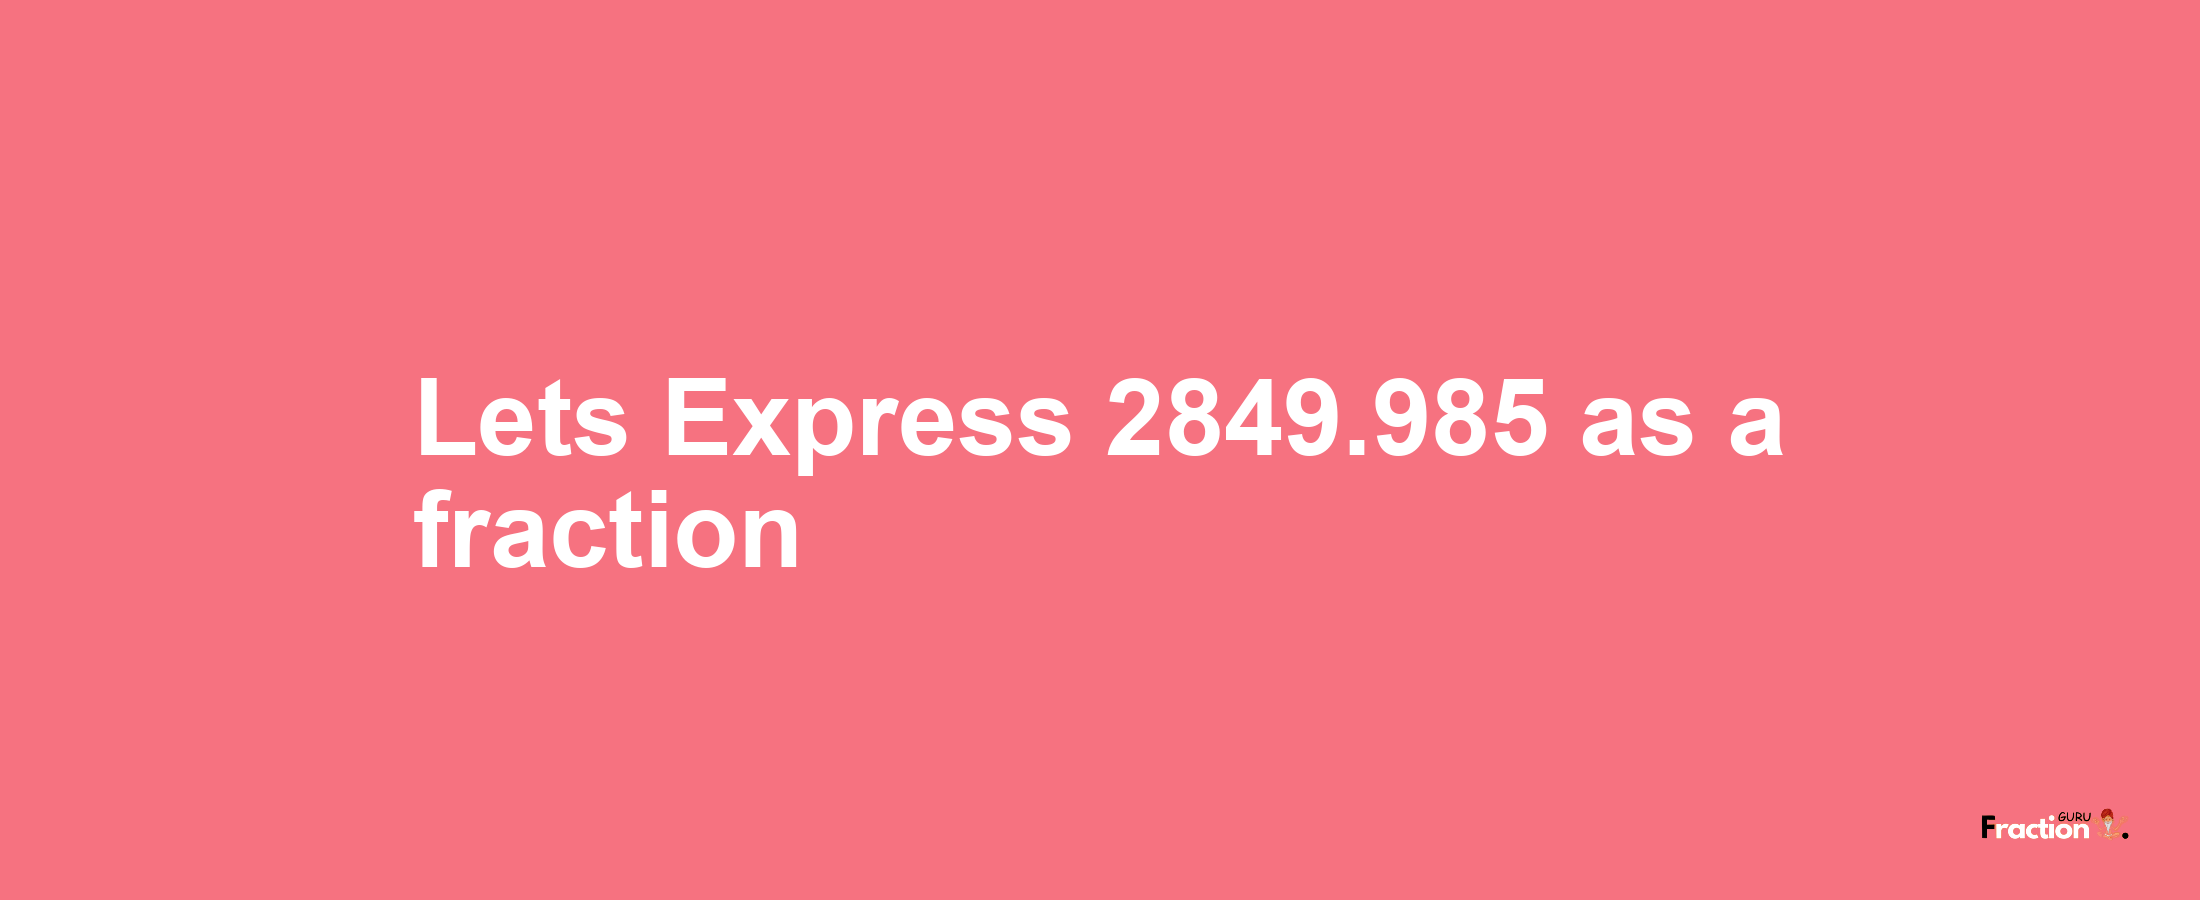 Lets Express 2849.985 as afraction